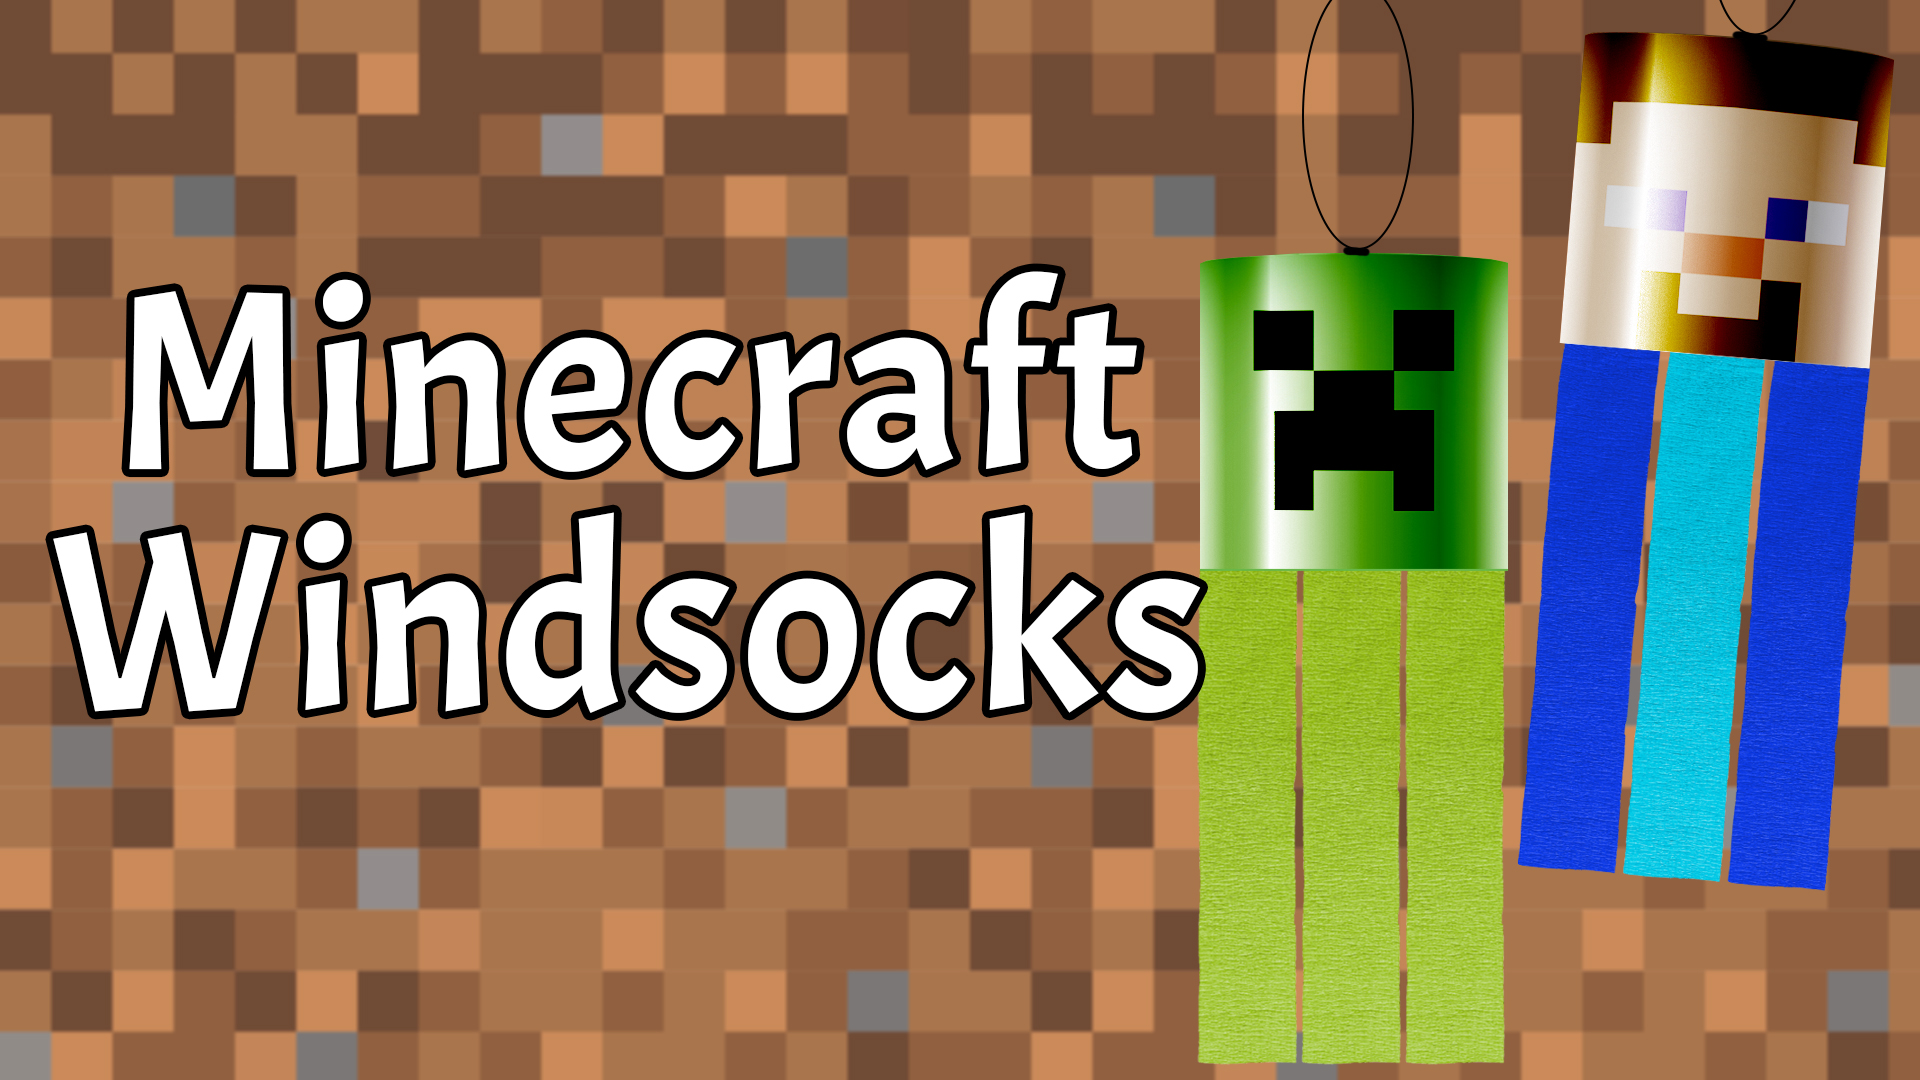 Image reads "Minecraft Windsocks" against a pixelated brick background. Two Minecraft windsocks with streamers are to the right of the title.